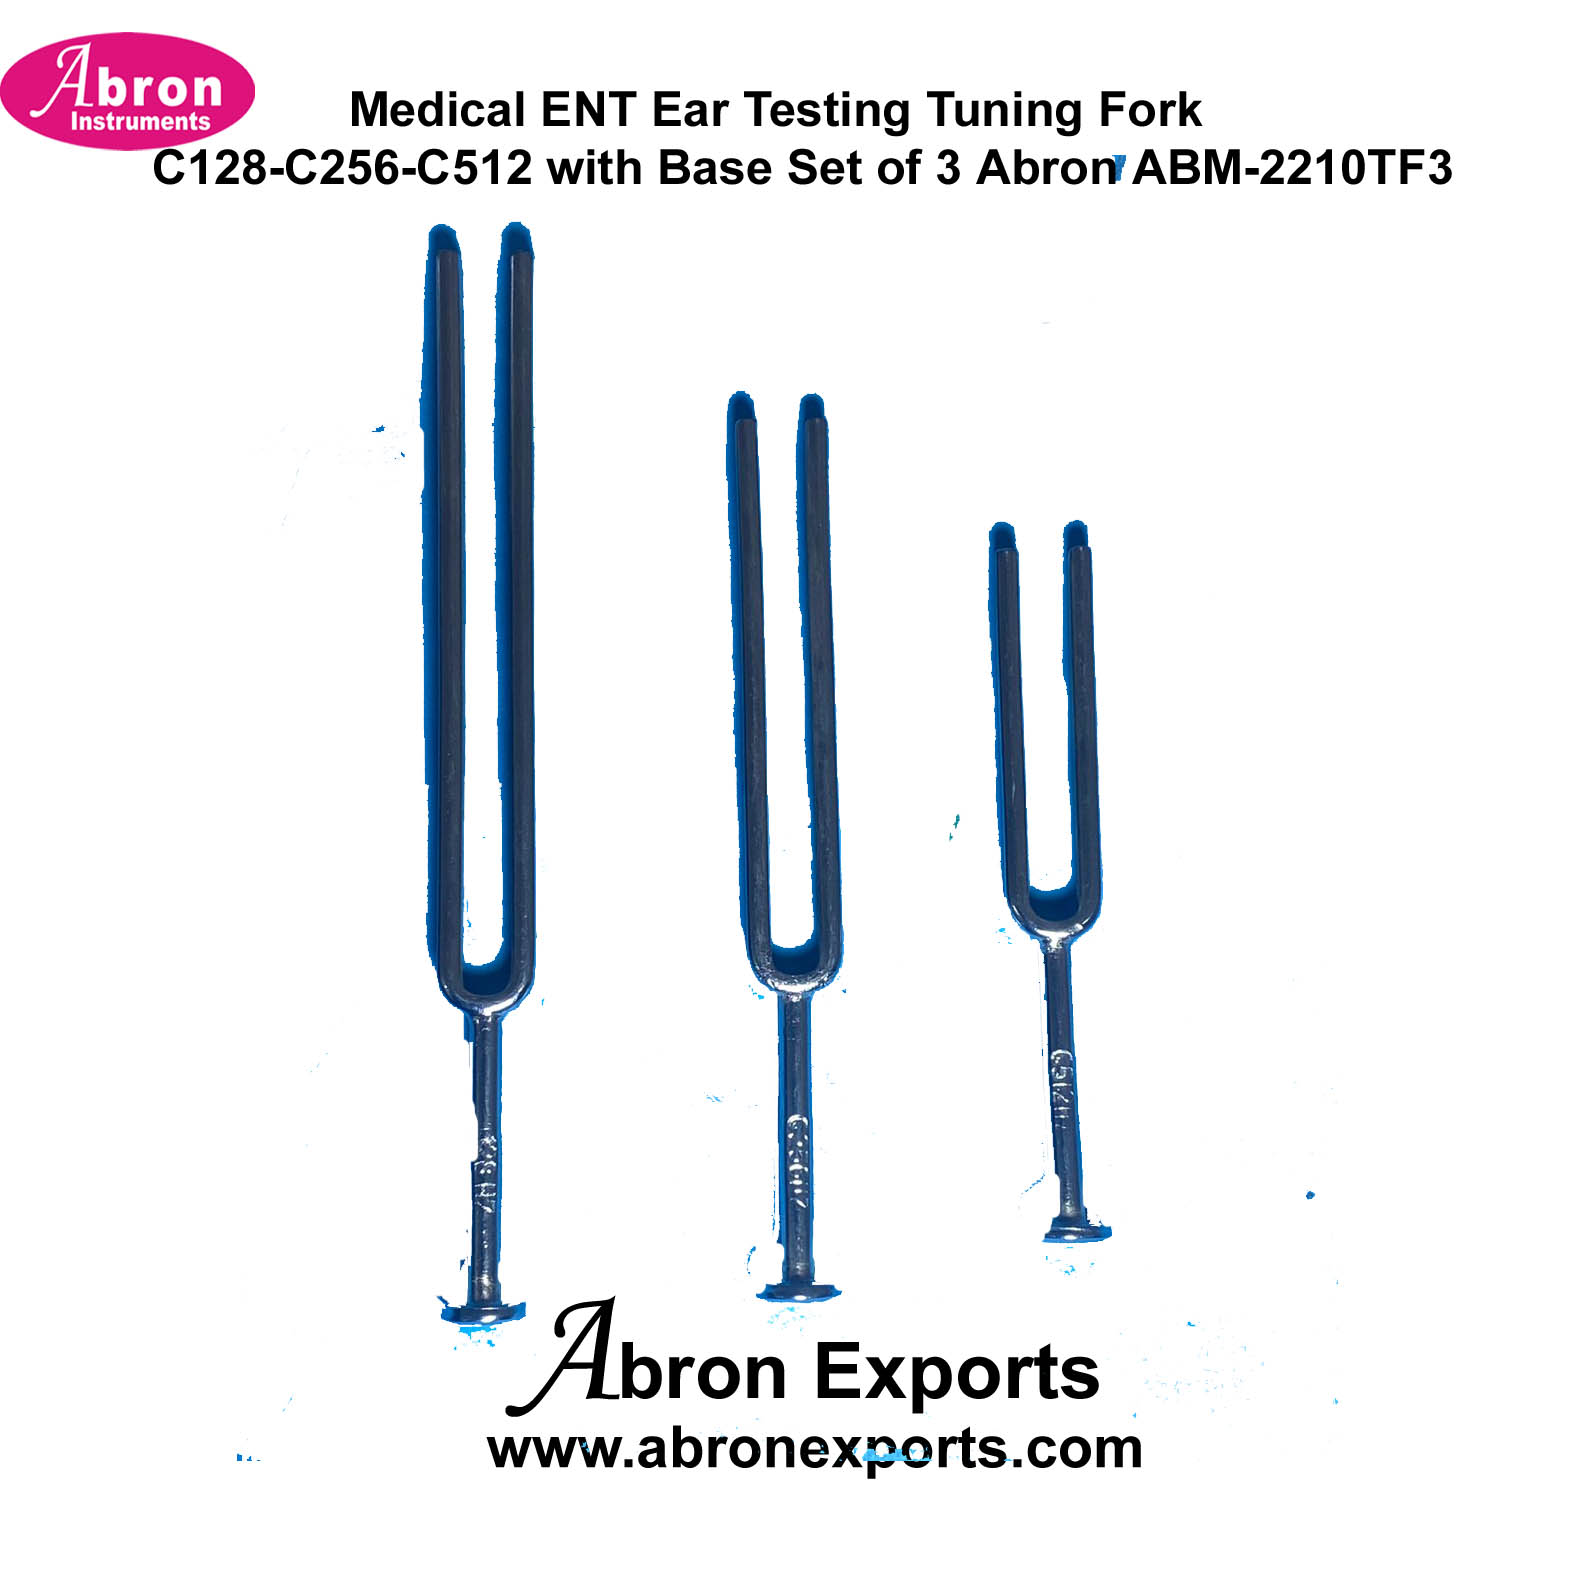 Medical ENT Ear Testing Tuning Fork C128 C256 C512 with Base Set of 3 Abron ABM-2210TF3